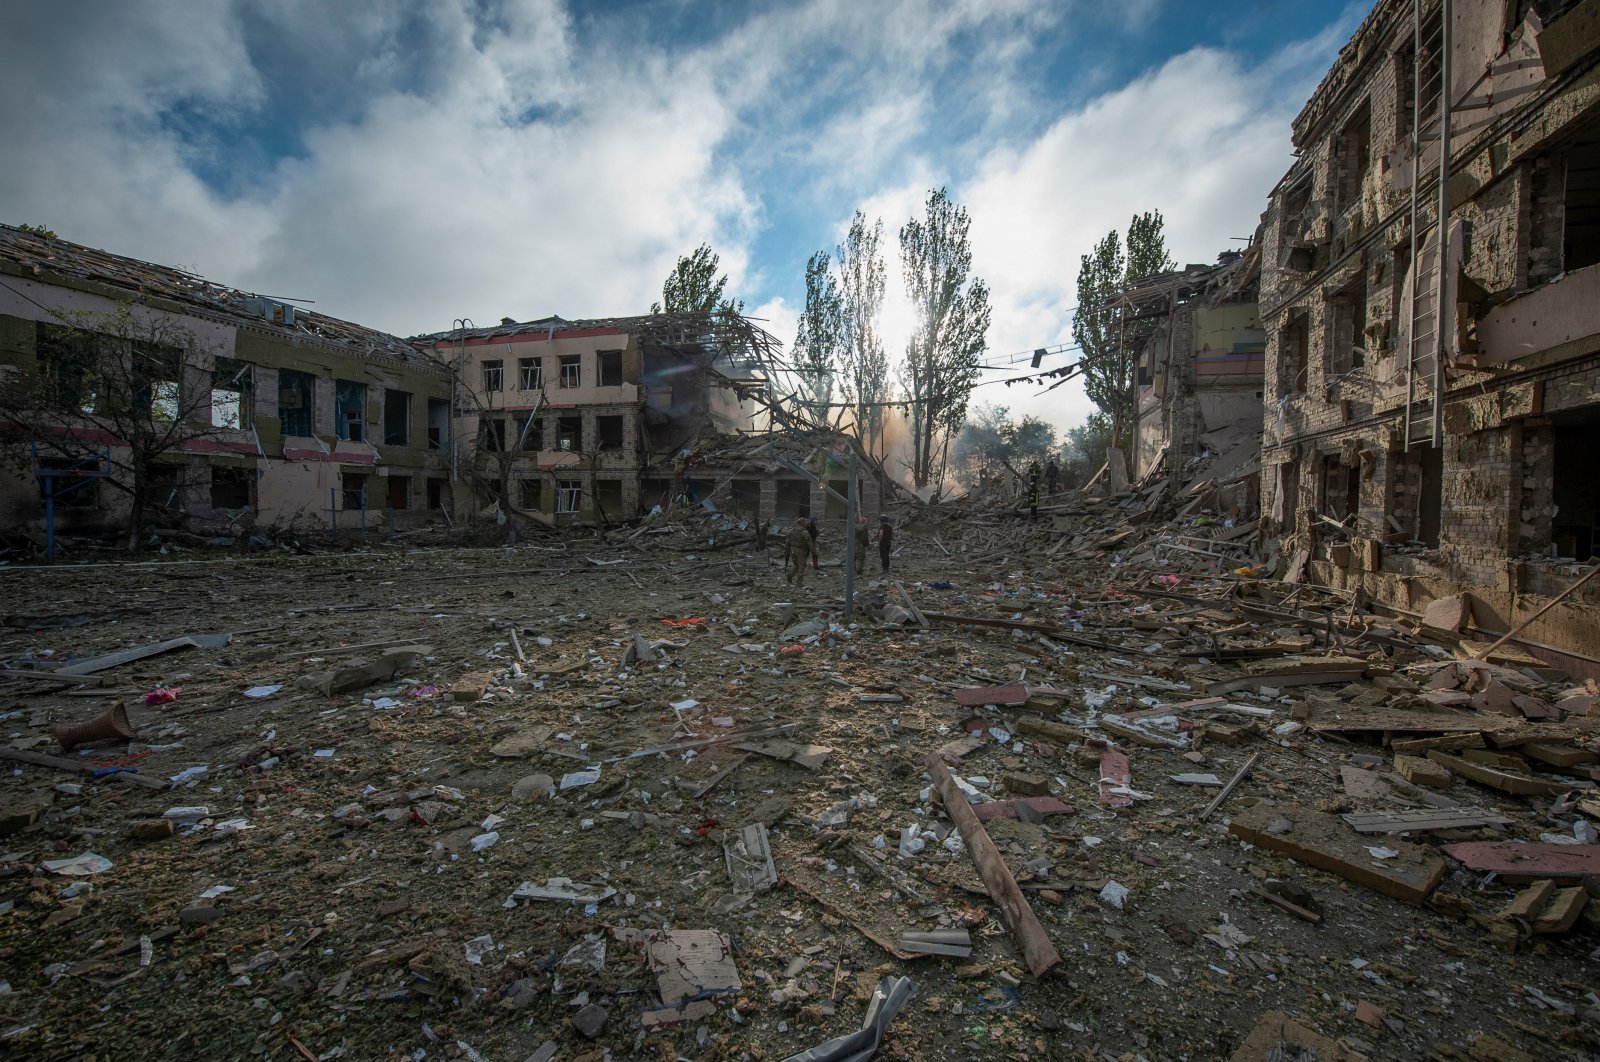 A view shows a school building destroyed by a Russian missile strike in Kramatorsk, Ukraine, July 21, 2022. (Reuters Photo)